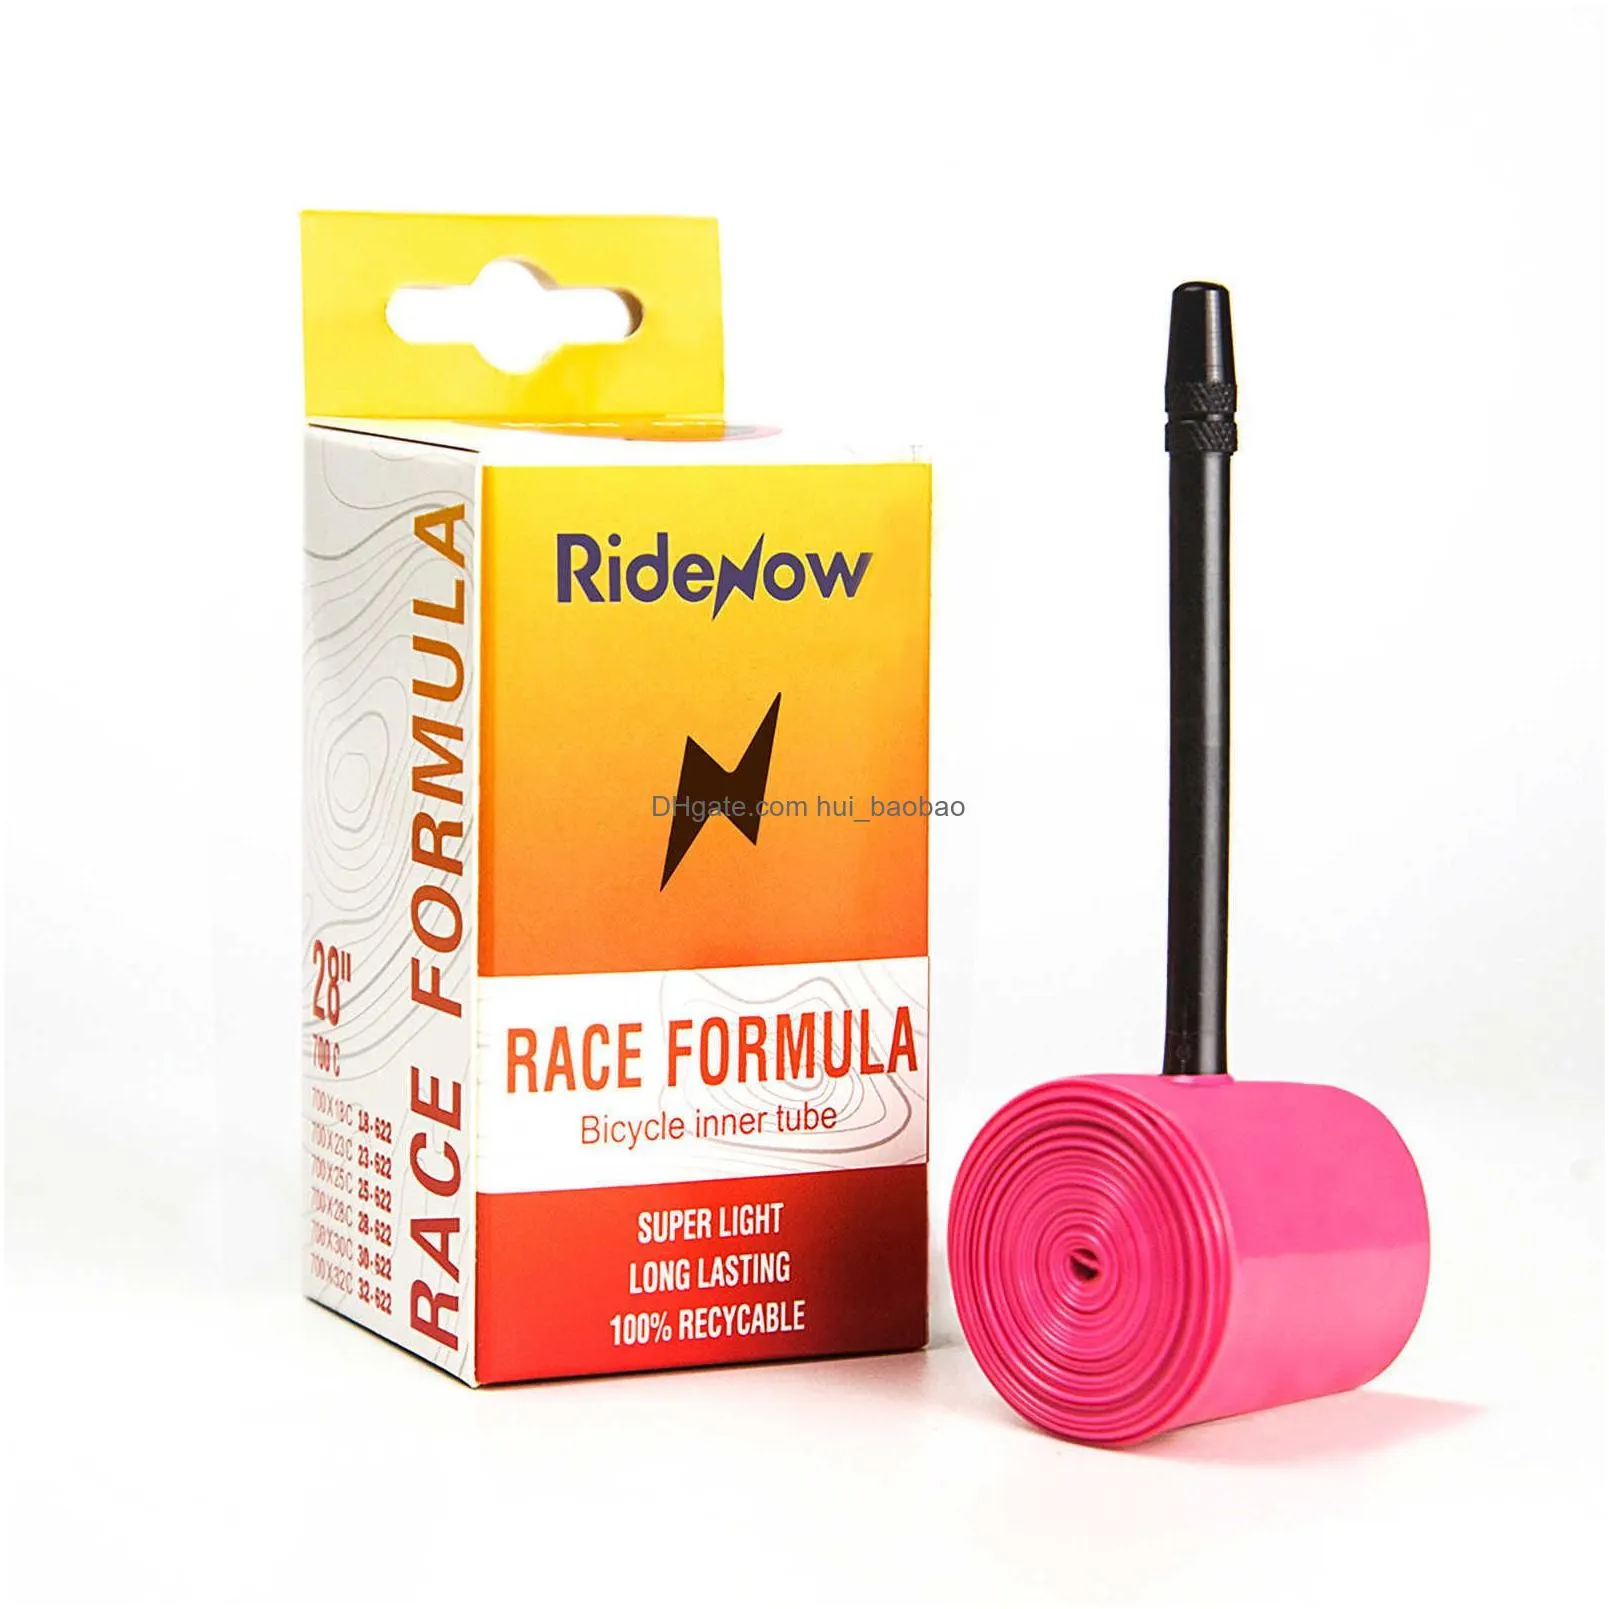 tires ridenow ultralight bike inner tube 700 x 18 25 28 32 road mtb bicycle tpu material tire 65mm length french valve super light